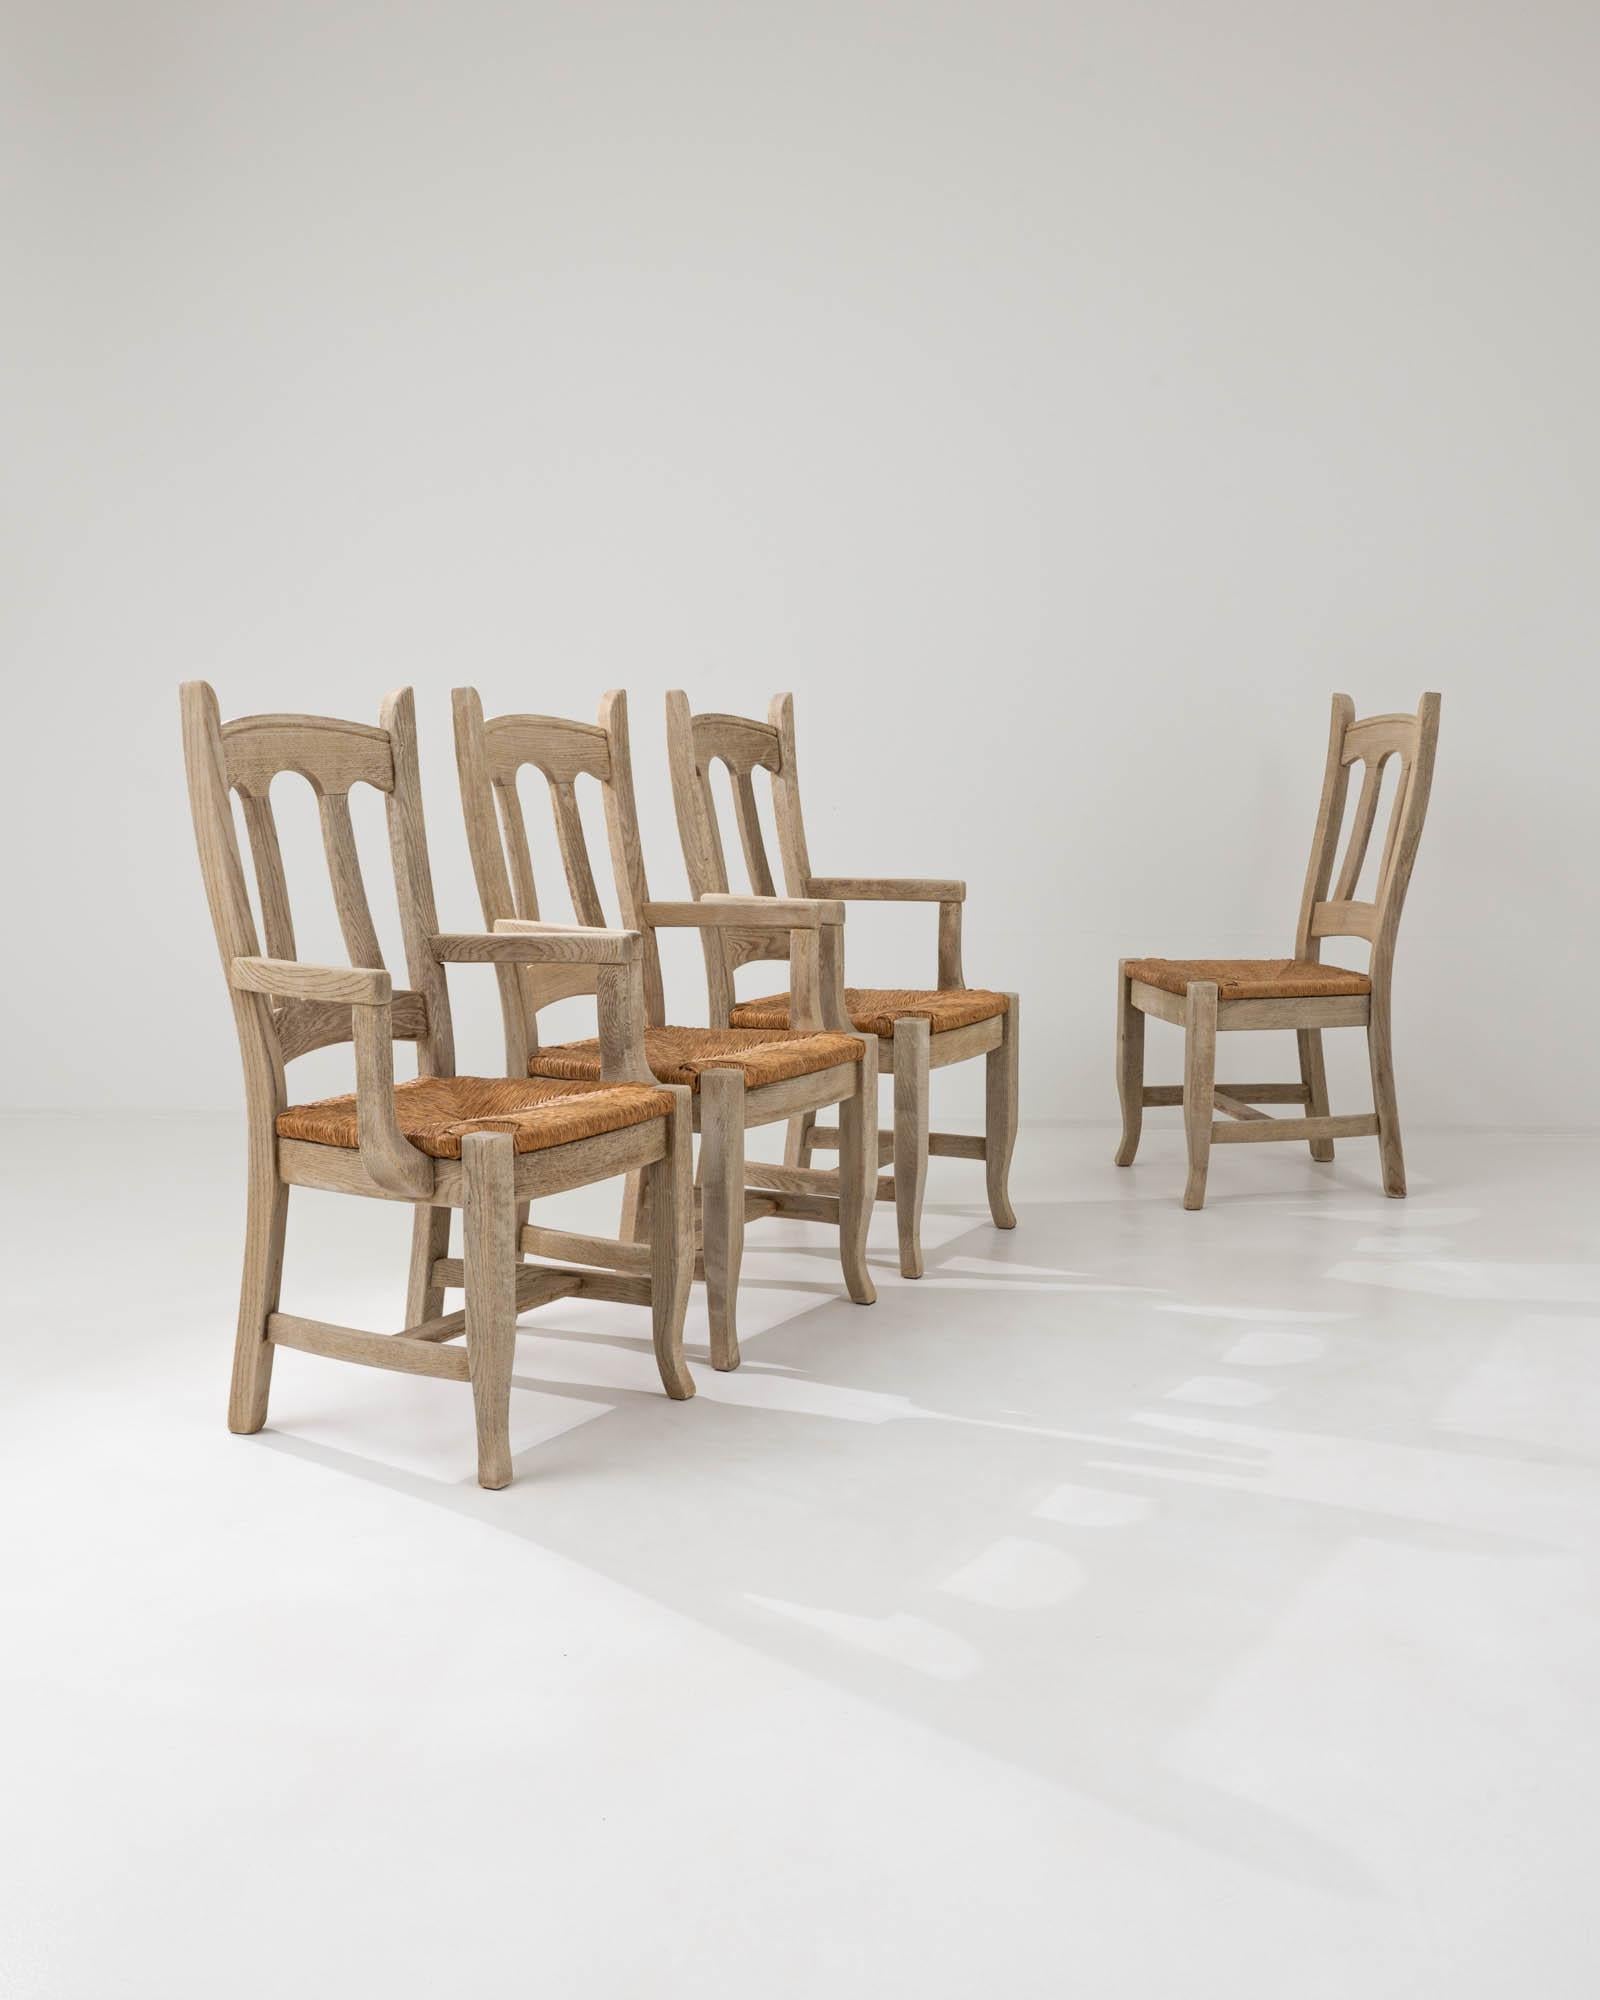 Handcrafted in Belgium in the 20th century, this set of four dining chairs showcases a gracefully flowing silhouette shaped by subtly inclined backrests and curved armrests that organically grow into the base with bent legs. The traditional slat